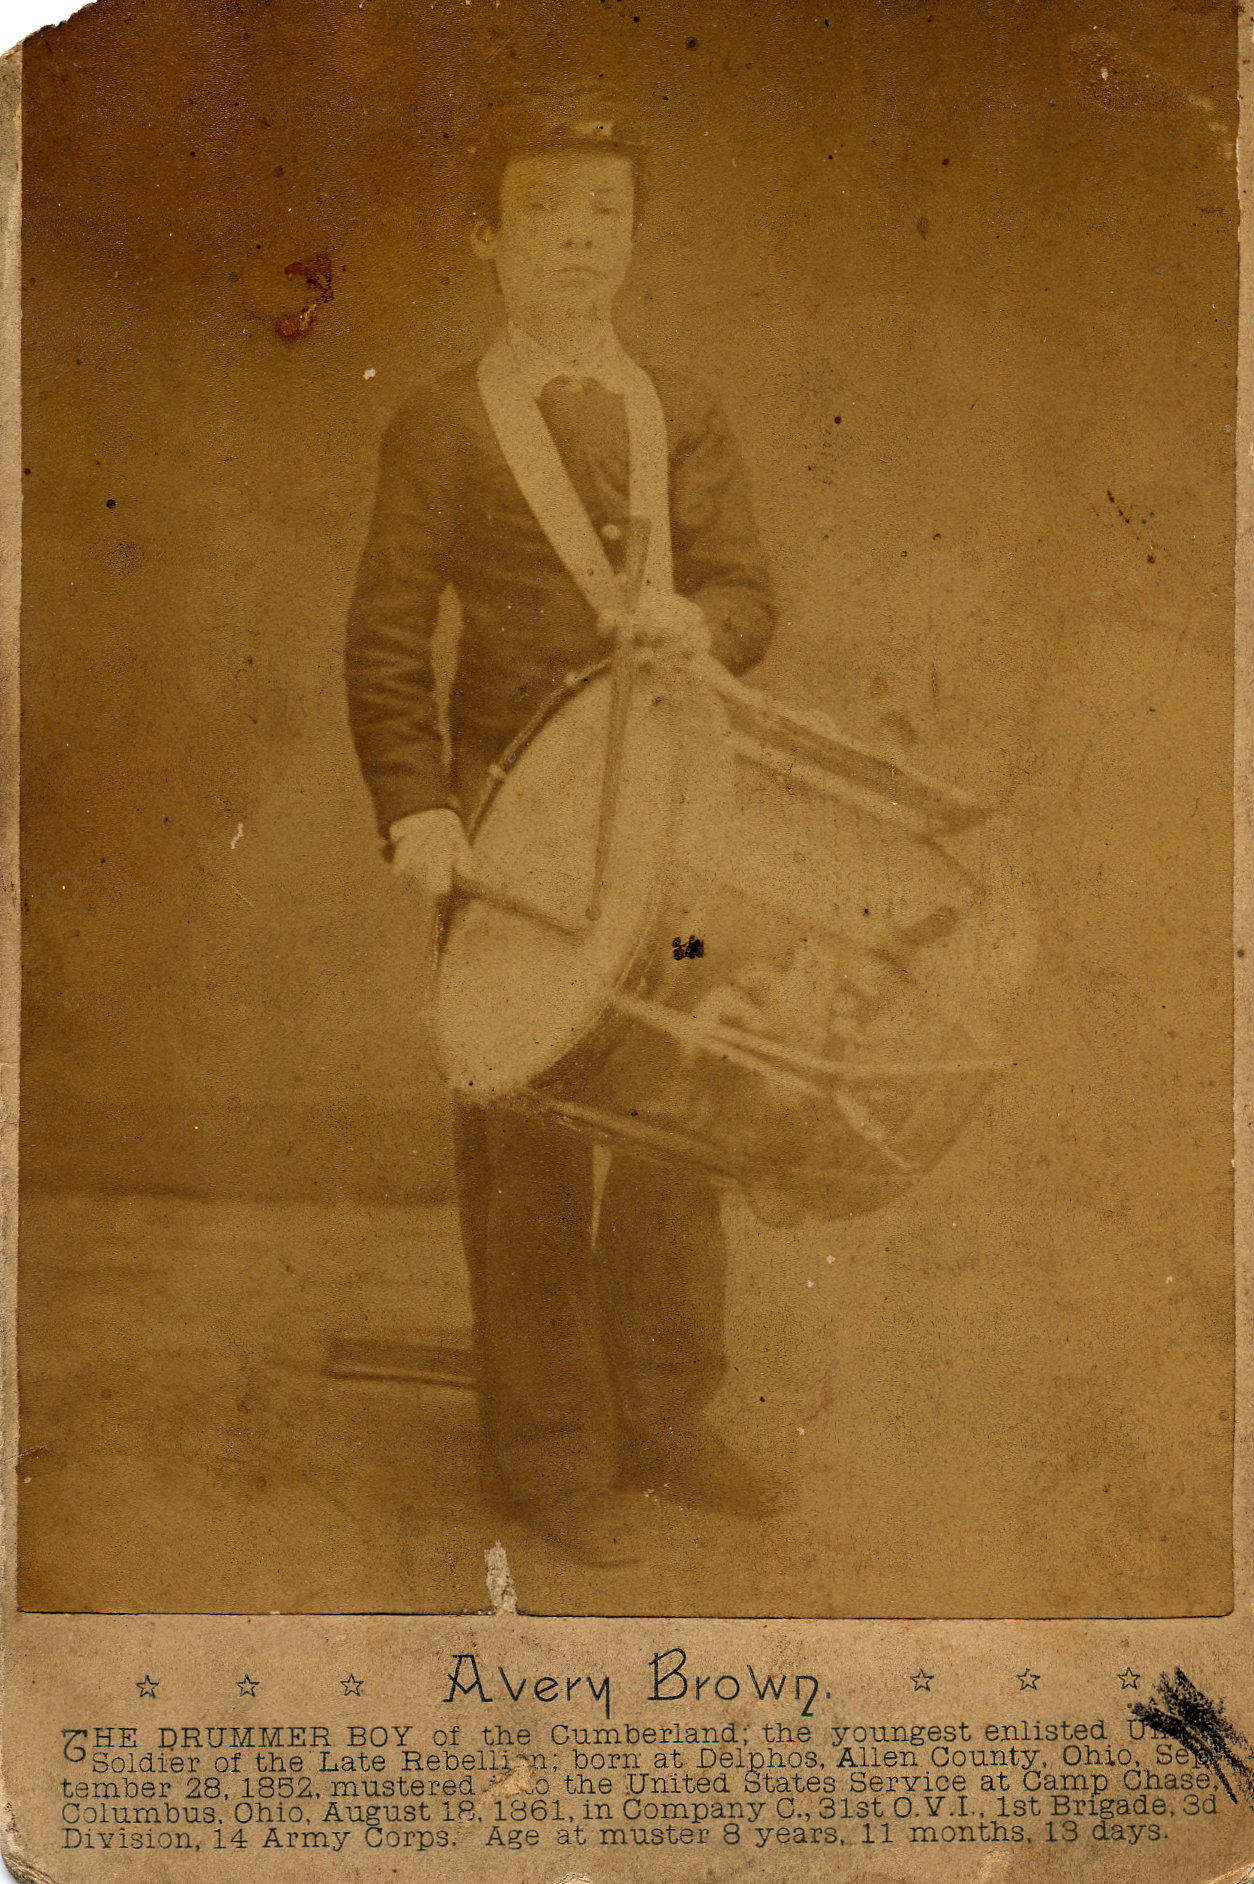 Avery Brown: Drummer Boy of the Cumberland